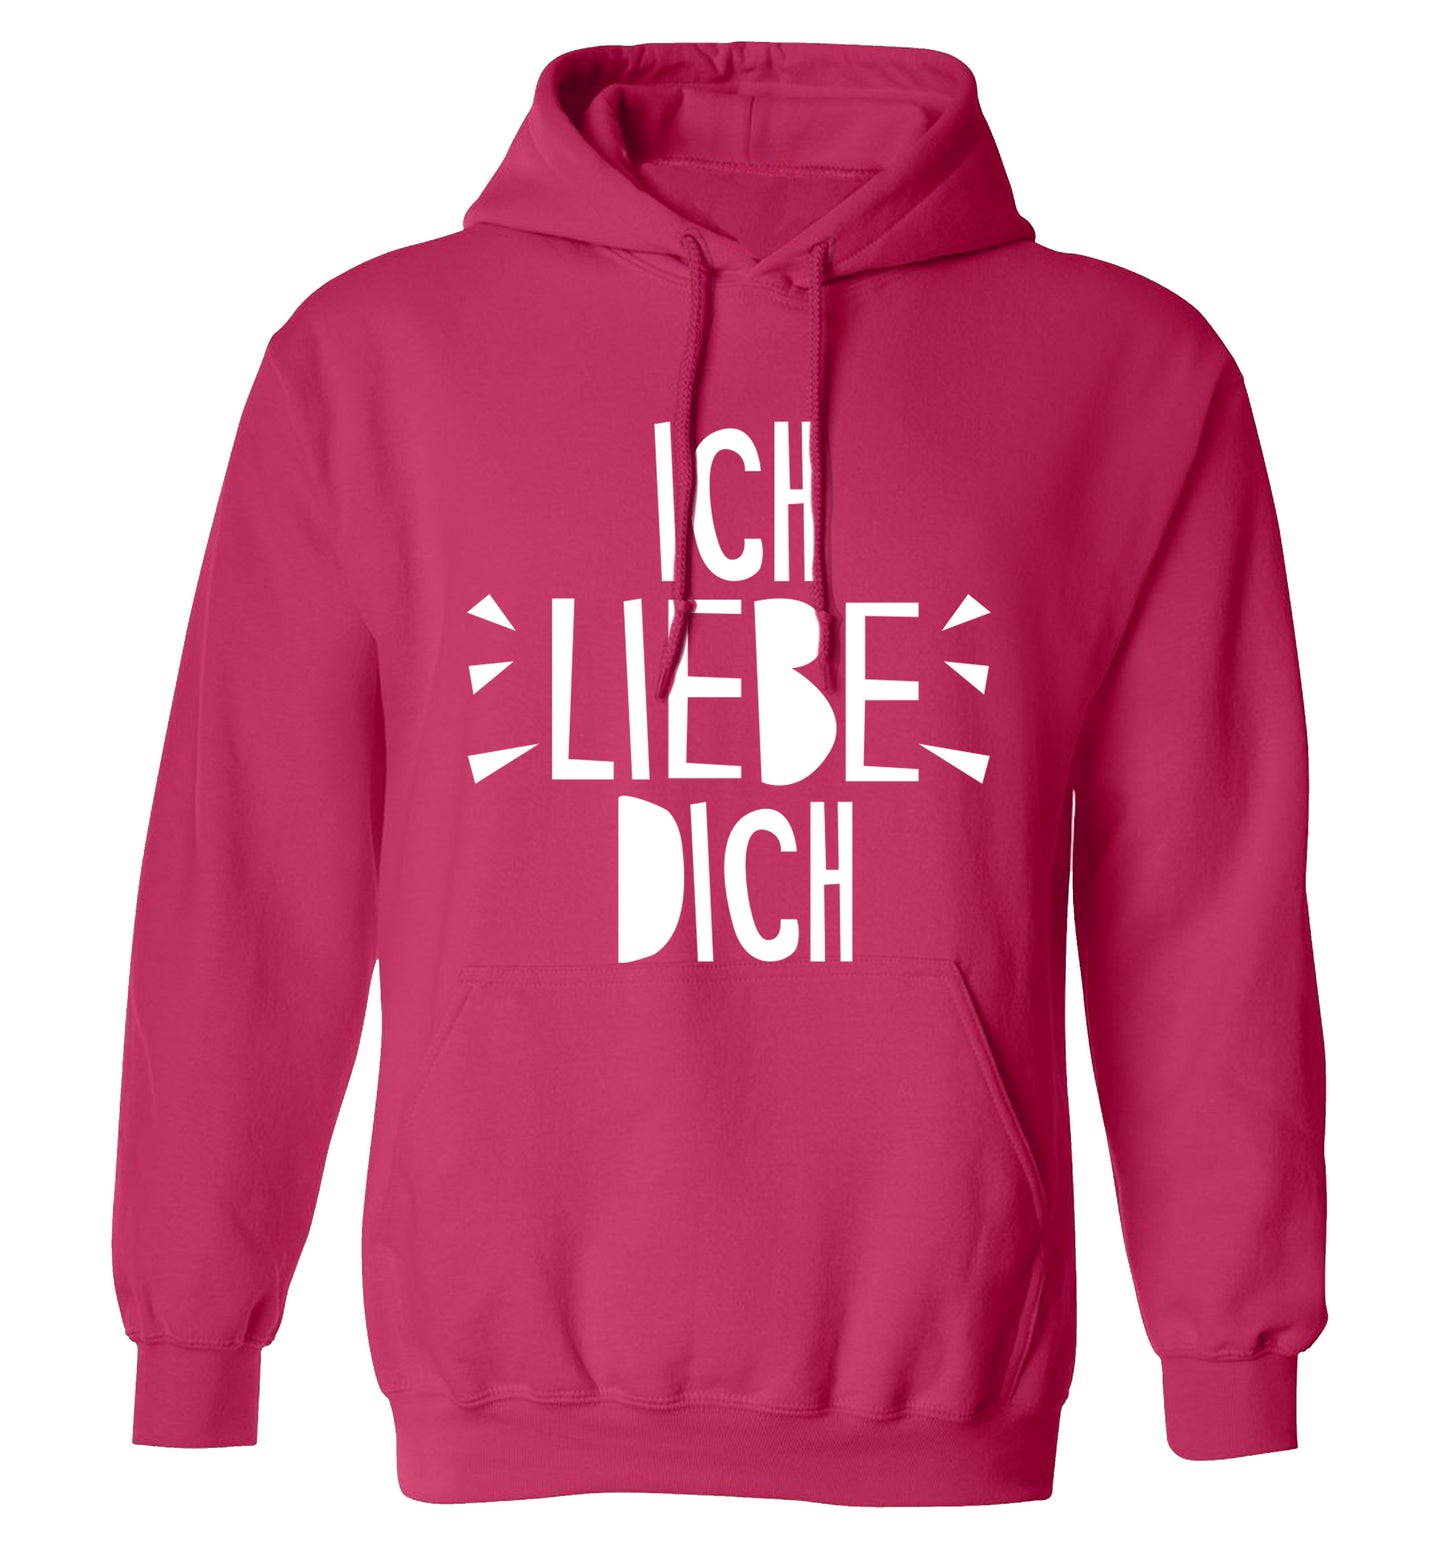 Ich liebe dich - I love you adults unisex pink hoodie 2XL